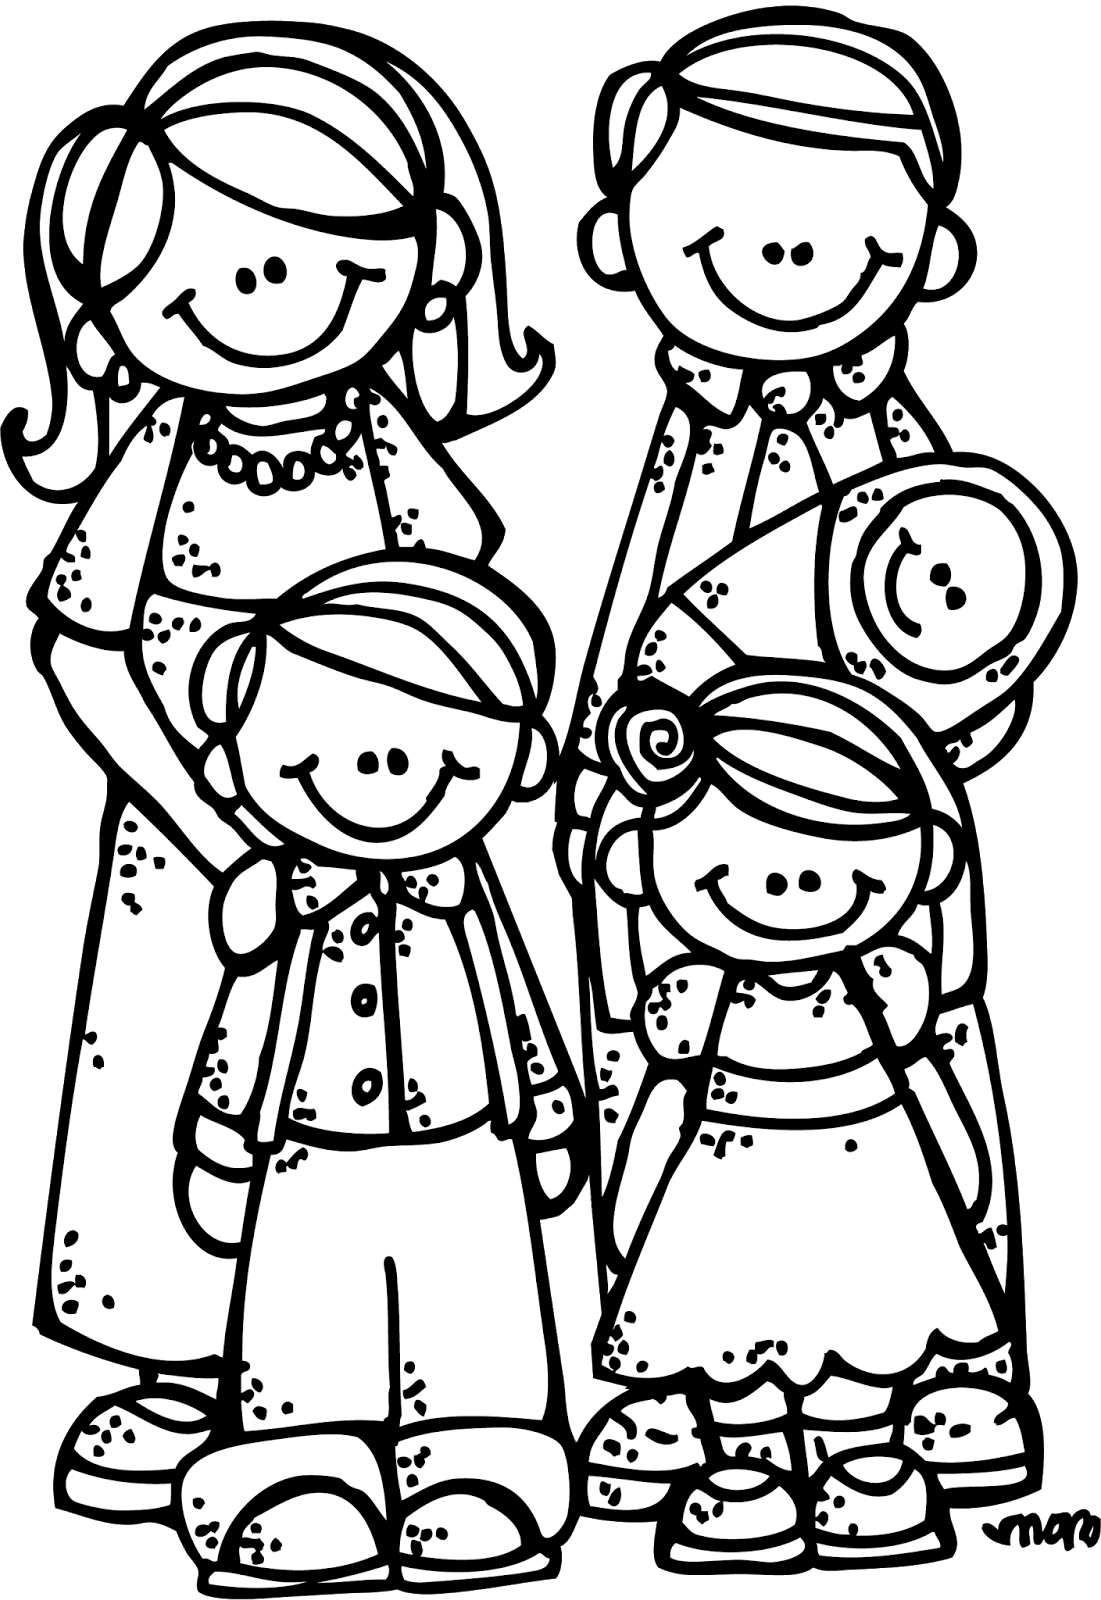 Lds Family Clipart Black And White   Clipartxtras Throughout Lds Family Clipart Black And White 13021 - Lds Family, Transparent background PNG HD thumbnail